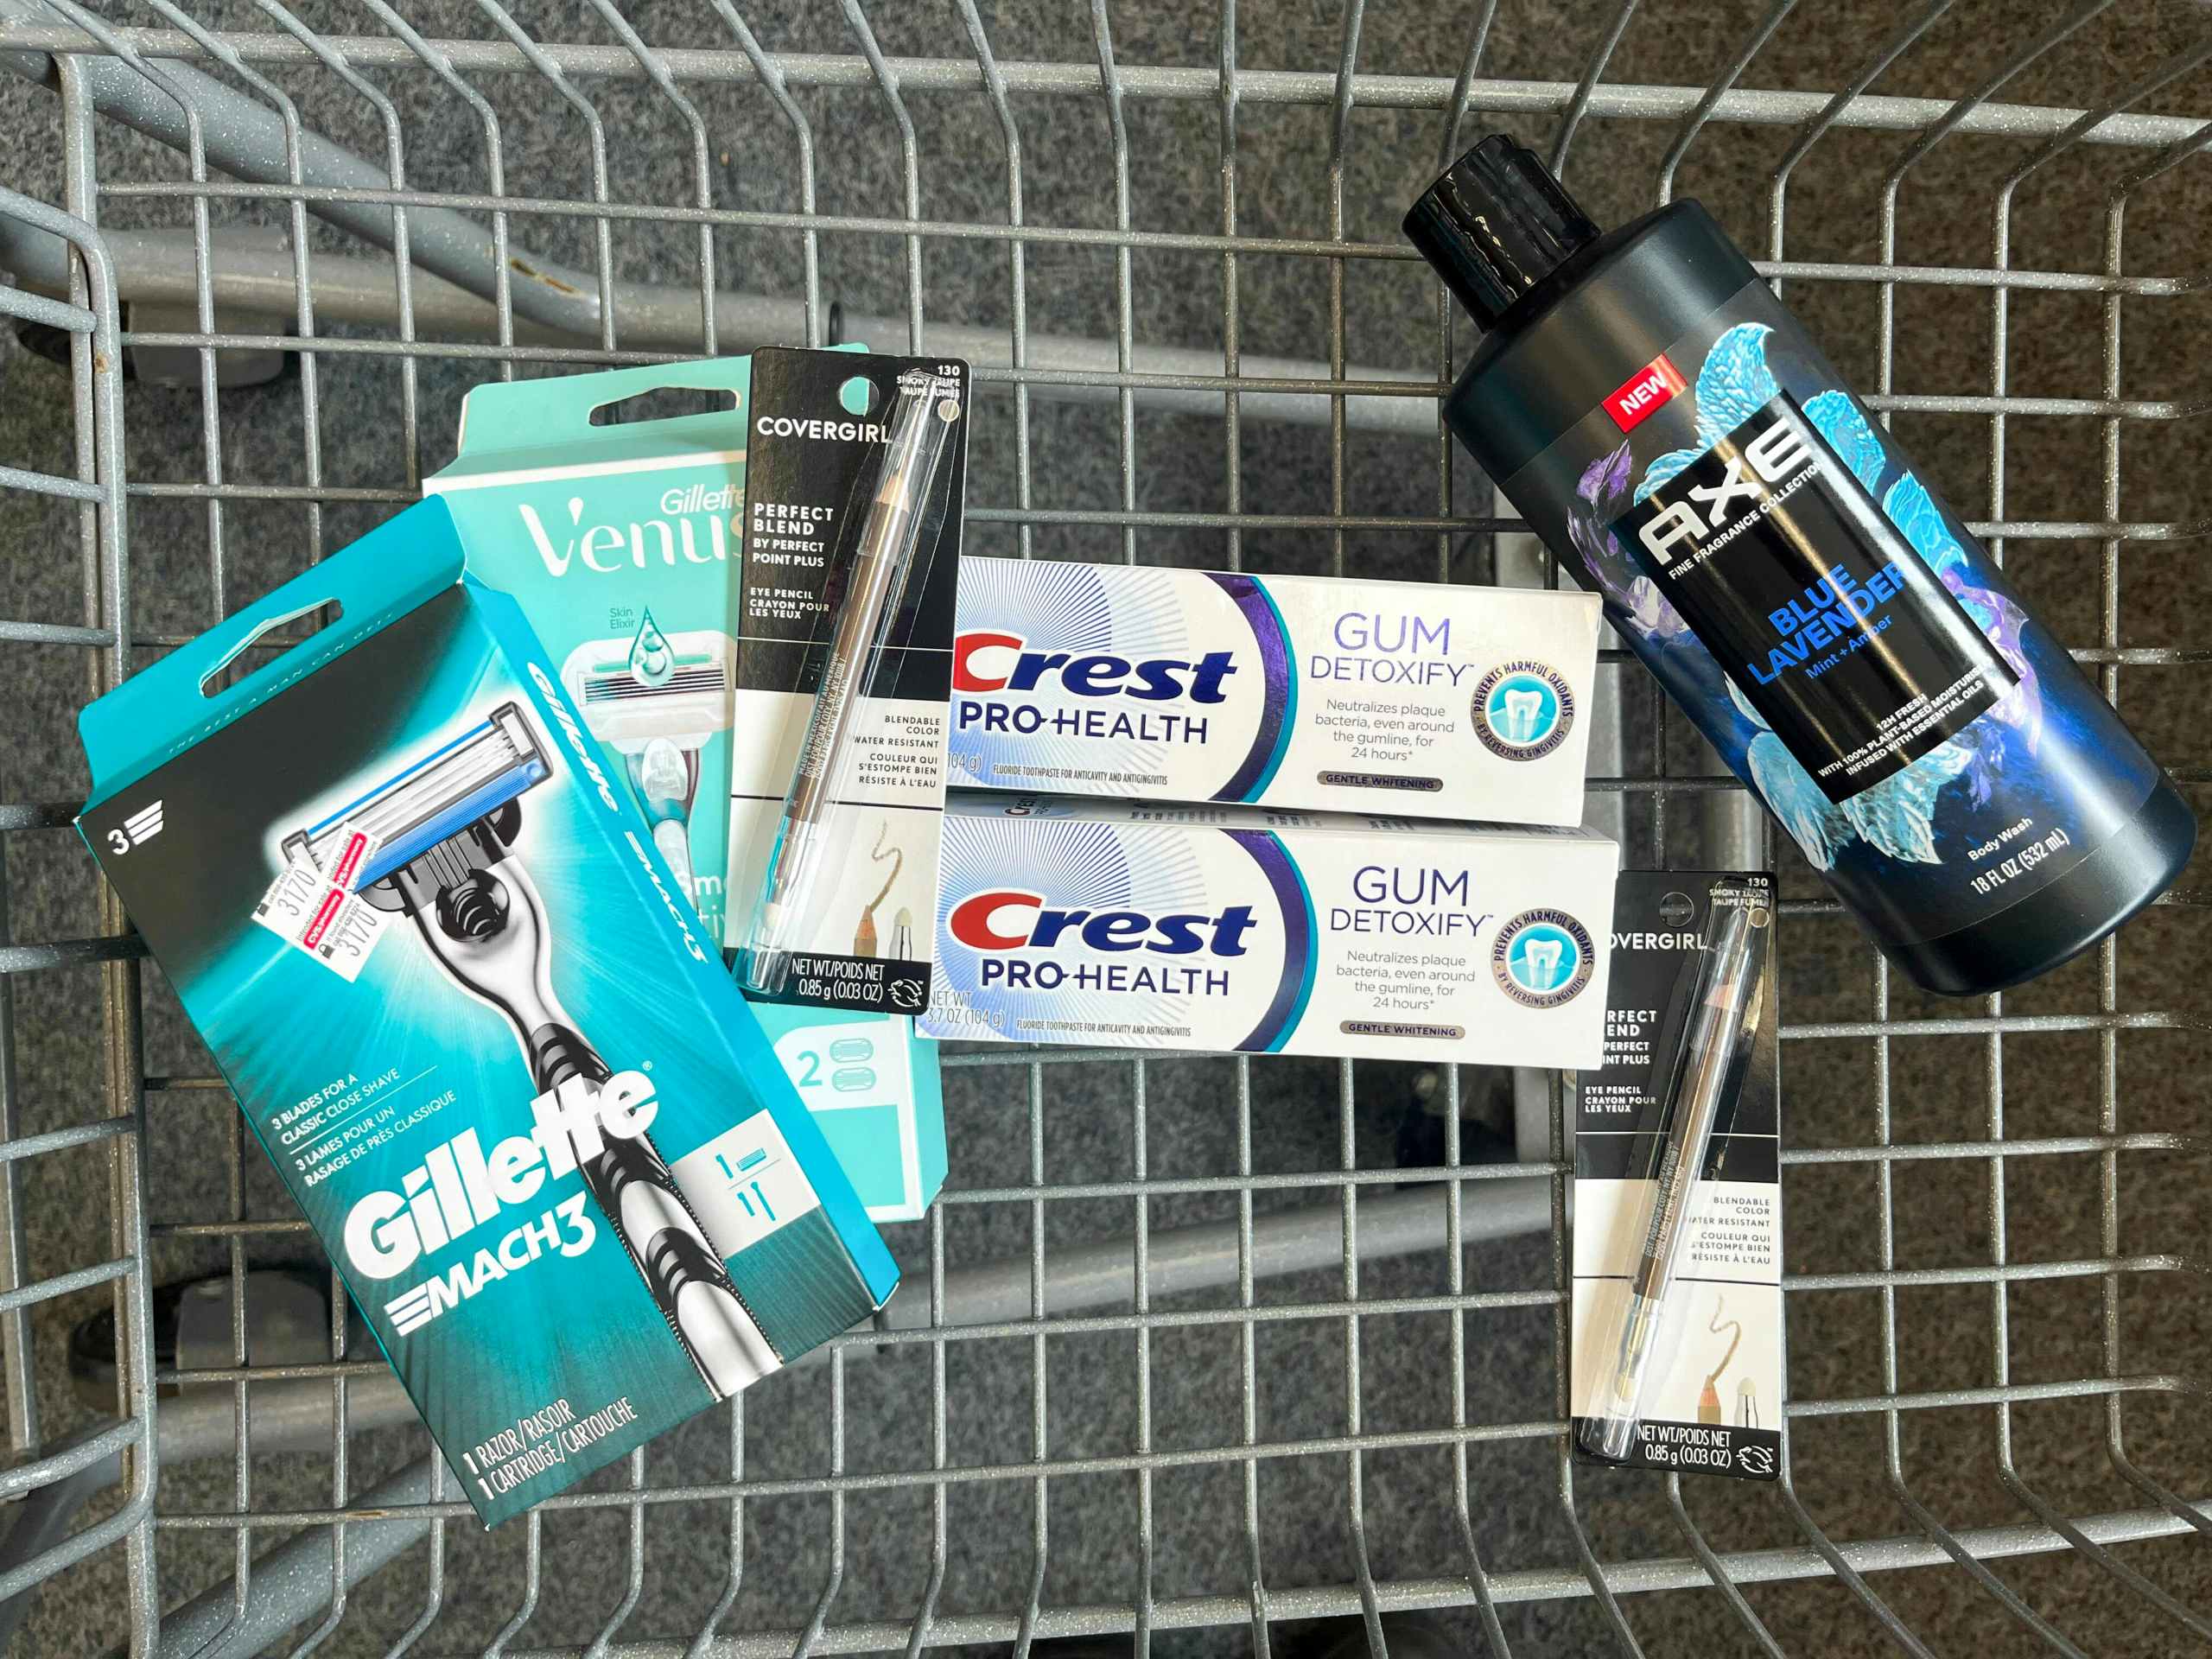 shopping cart with Gillette Mach3 razor, Gillette Venus Smooth razor, Crest Detoxify toothpaste, Covergirl eyeliners, and Axe body wash inside